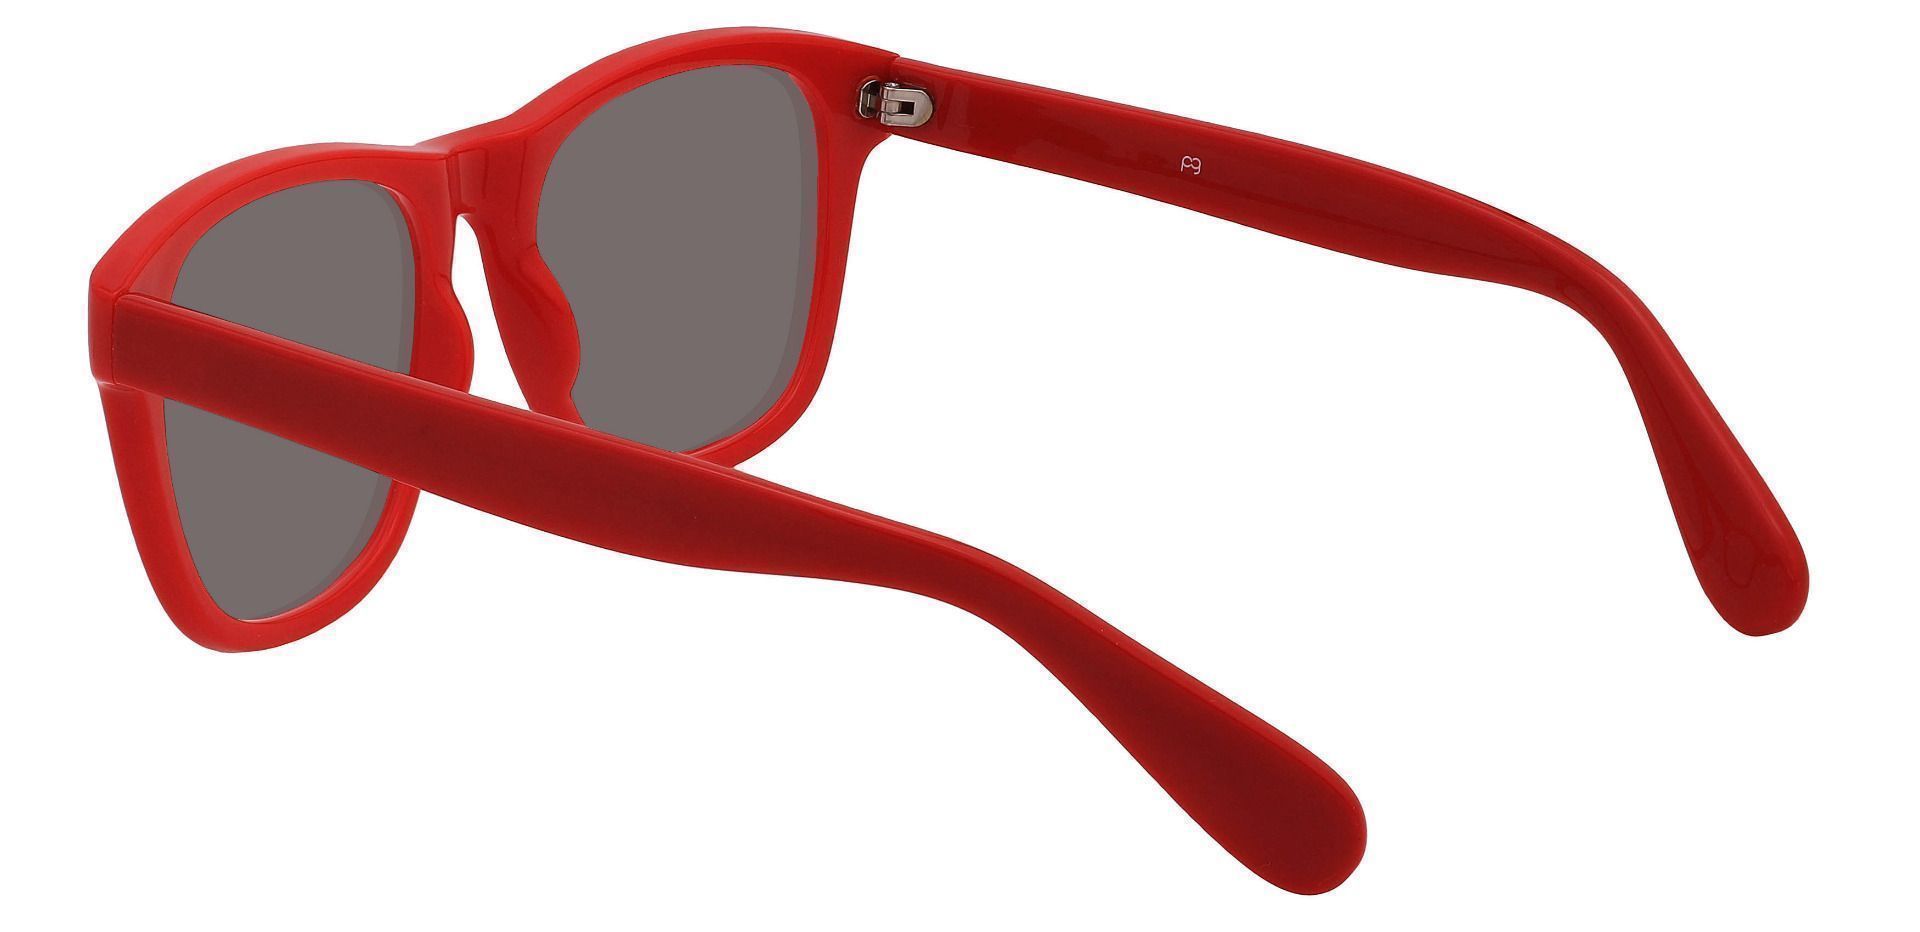 Yolanda Square Lined Bifocal Sunglasses - Red Frame With Gray Lenses